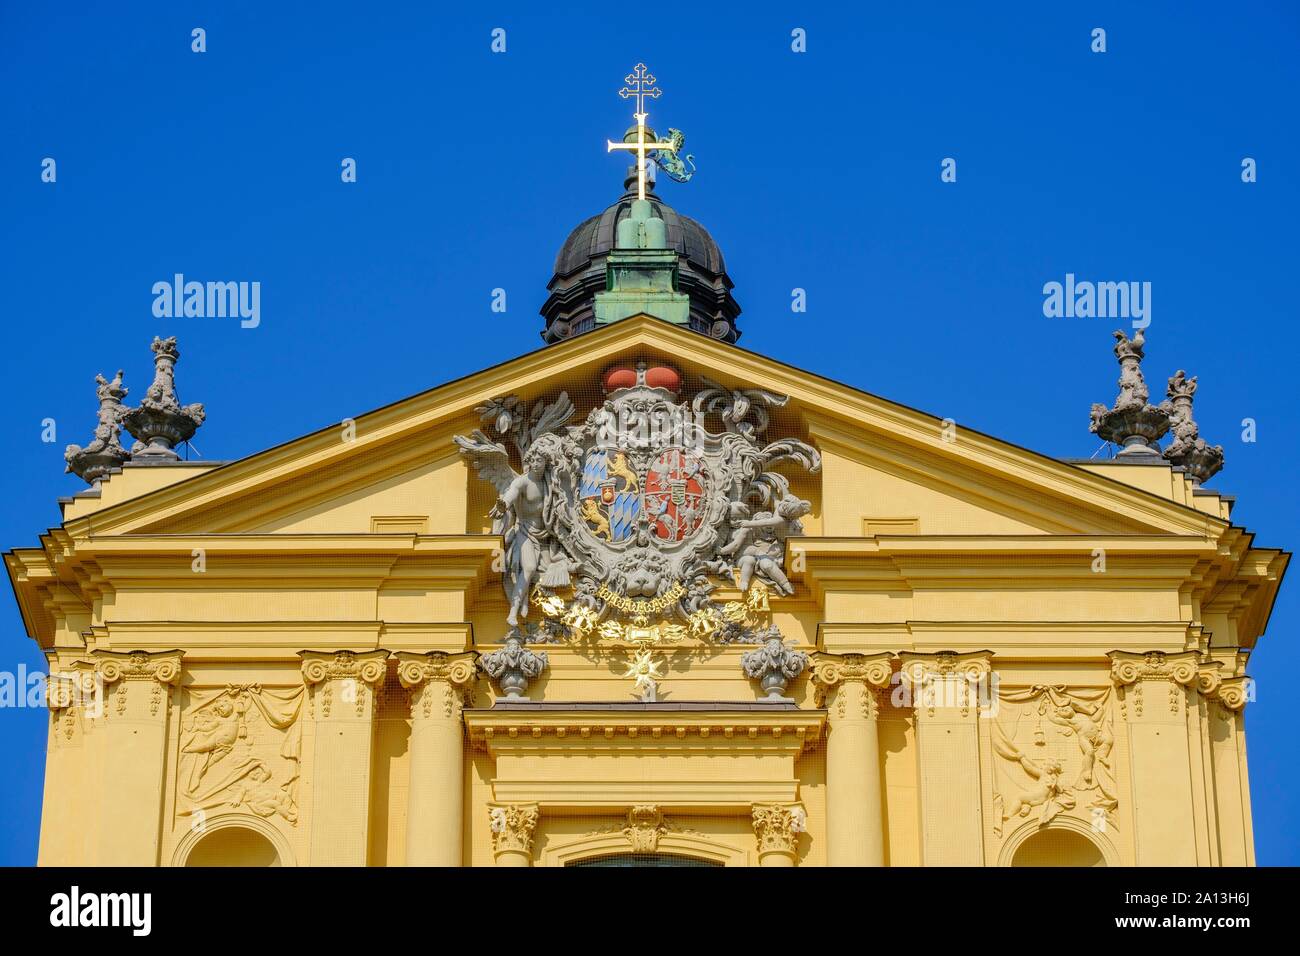 Allianz Coat of Arms in the Gable, Theatiner Church, Old Town, Munich, Upper Bavaria, Bavaria, Germany Stock Photo